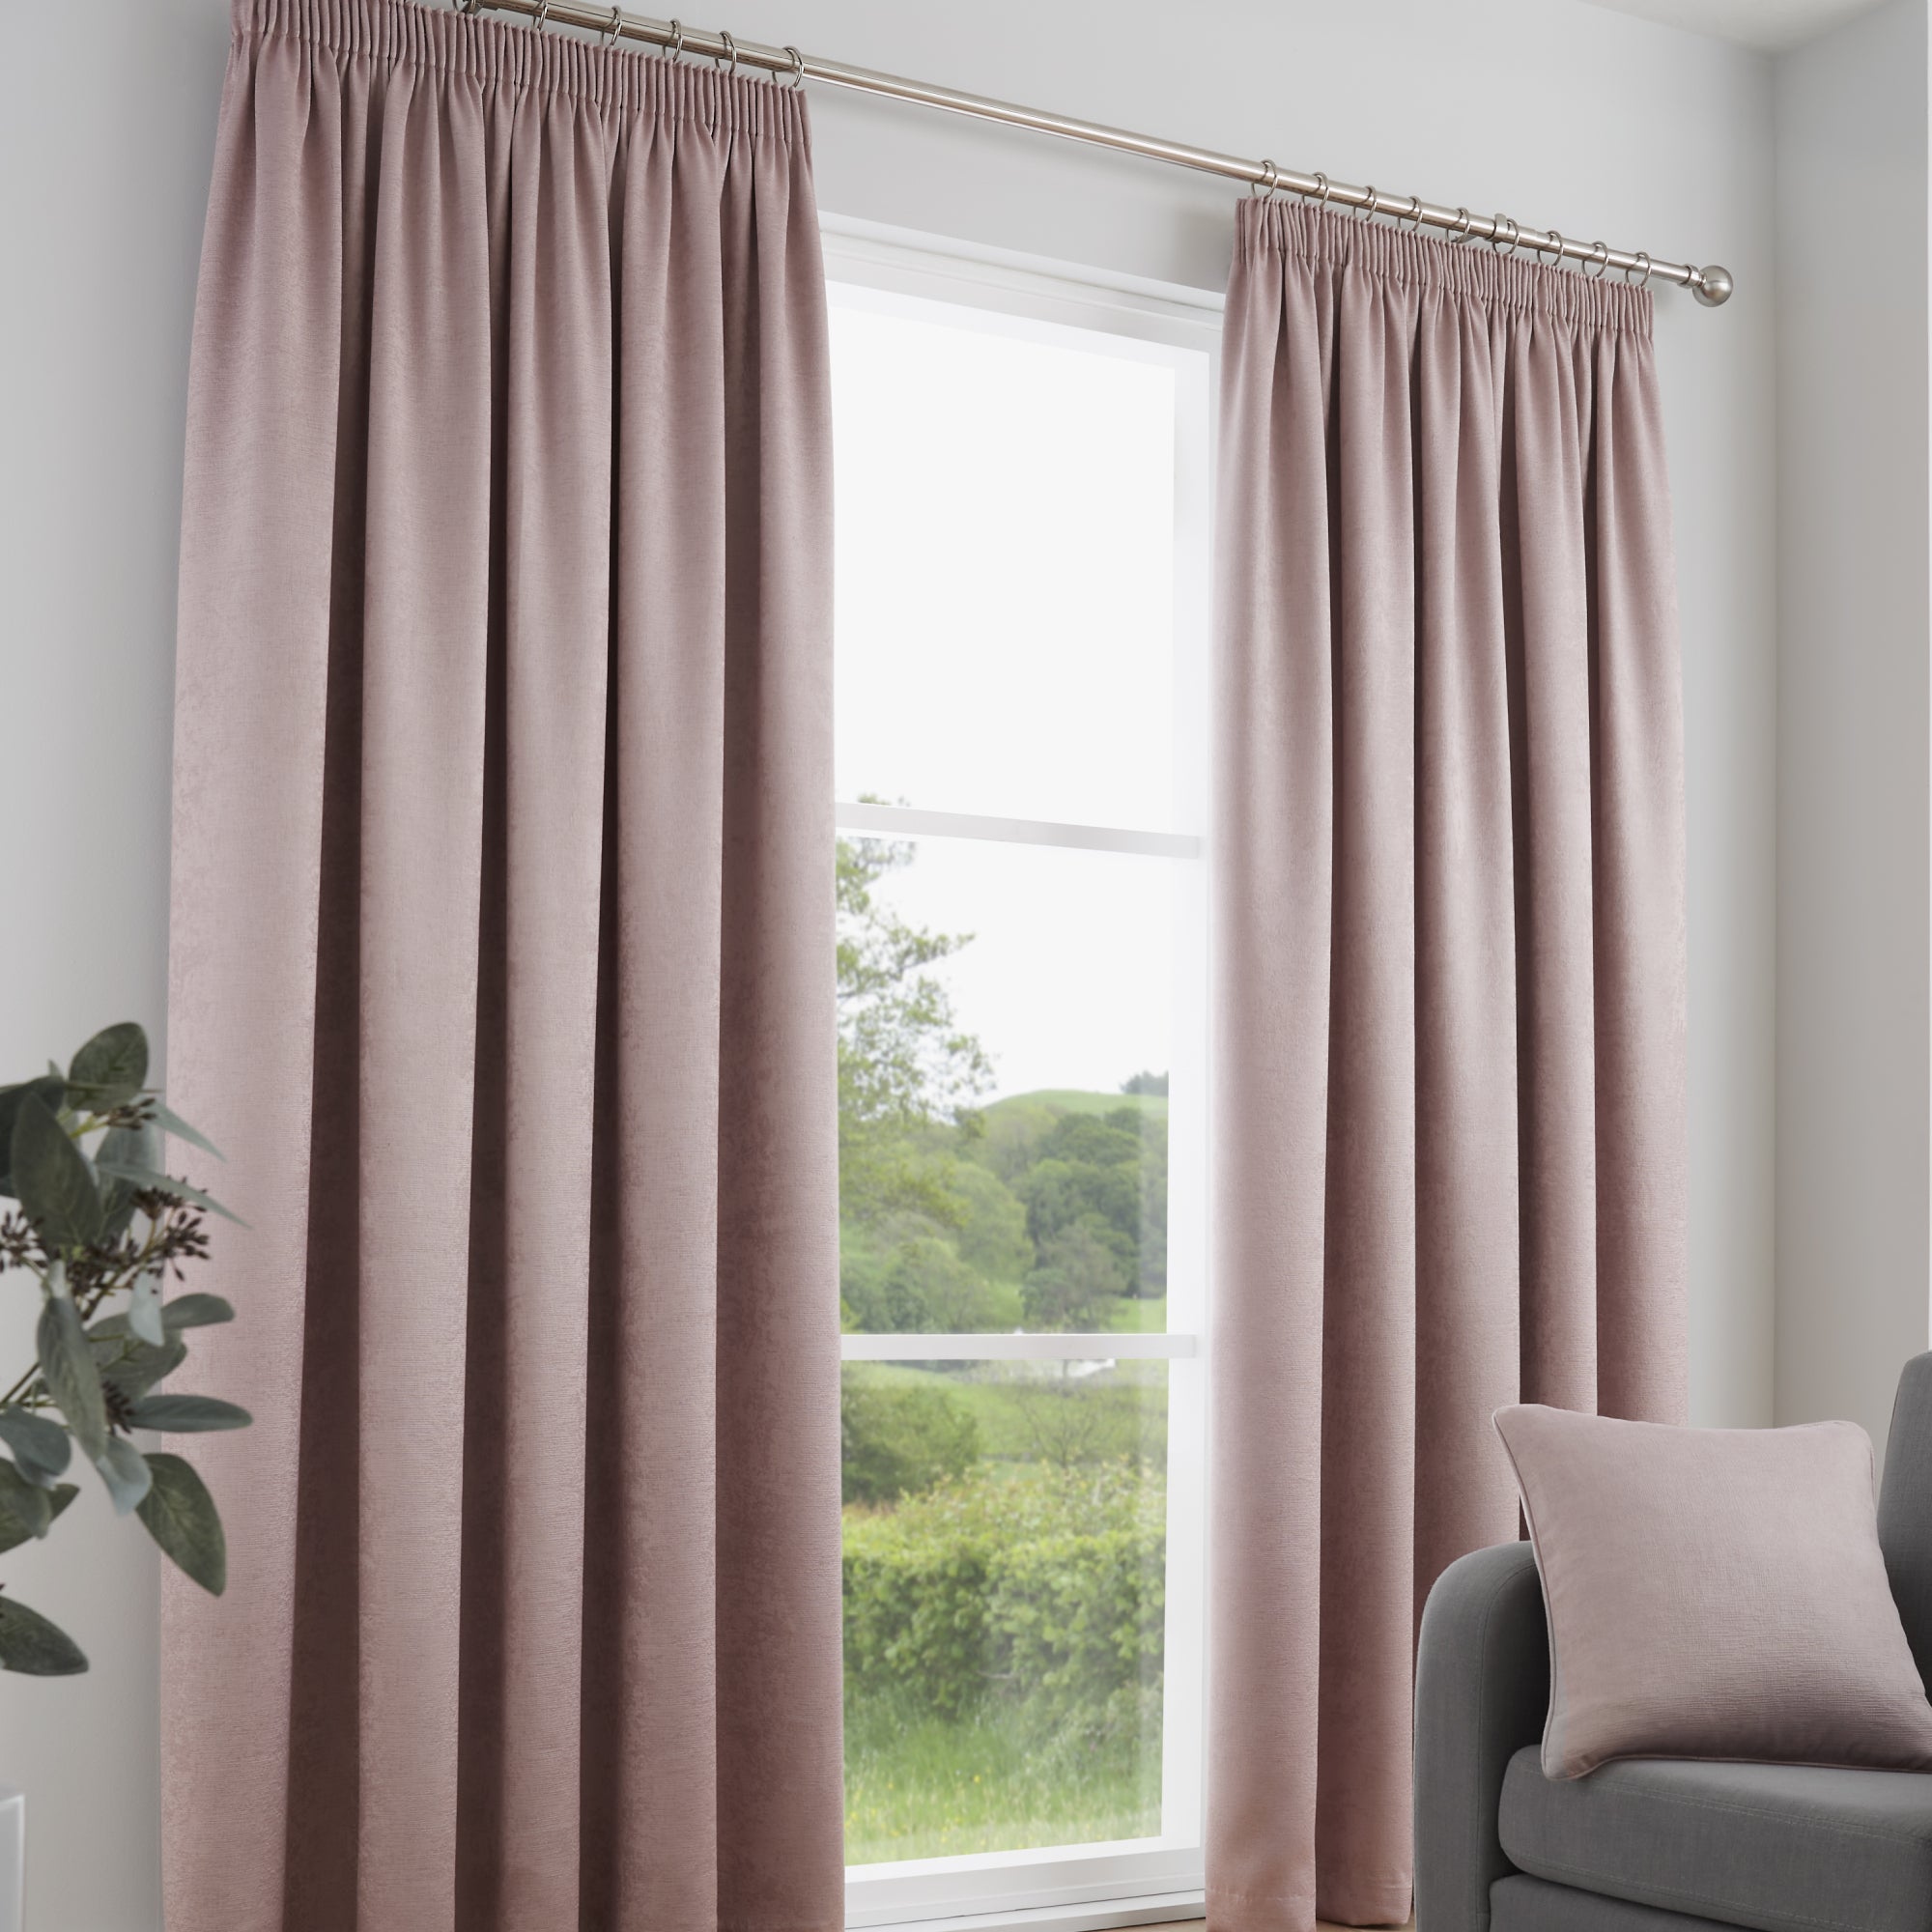 Pair of Pencil Pleat Curtains Galaxy by Fusion in Blush